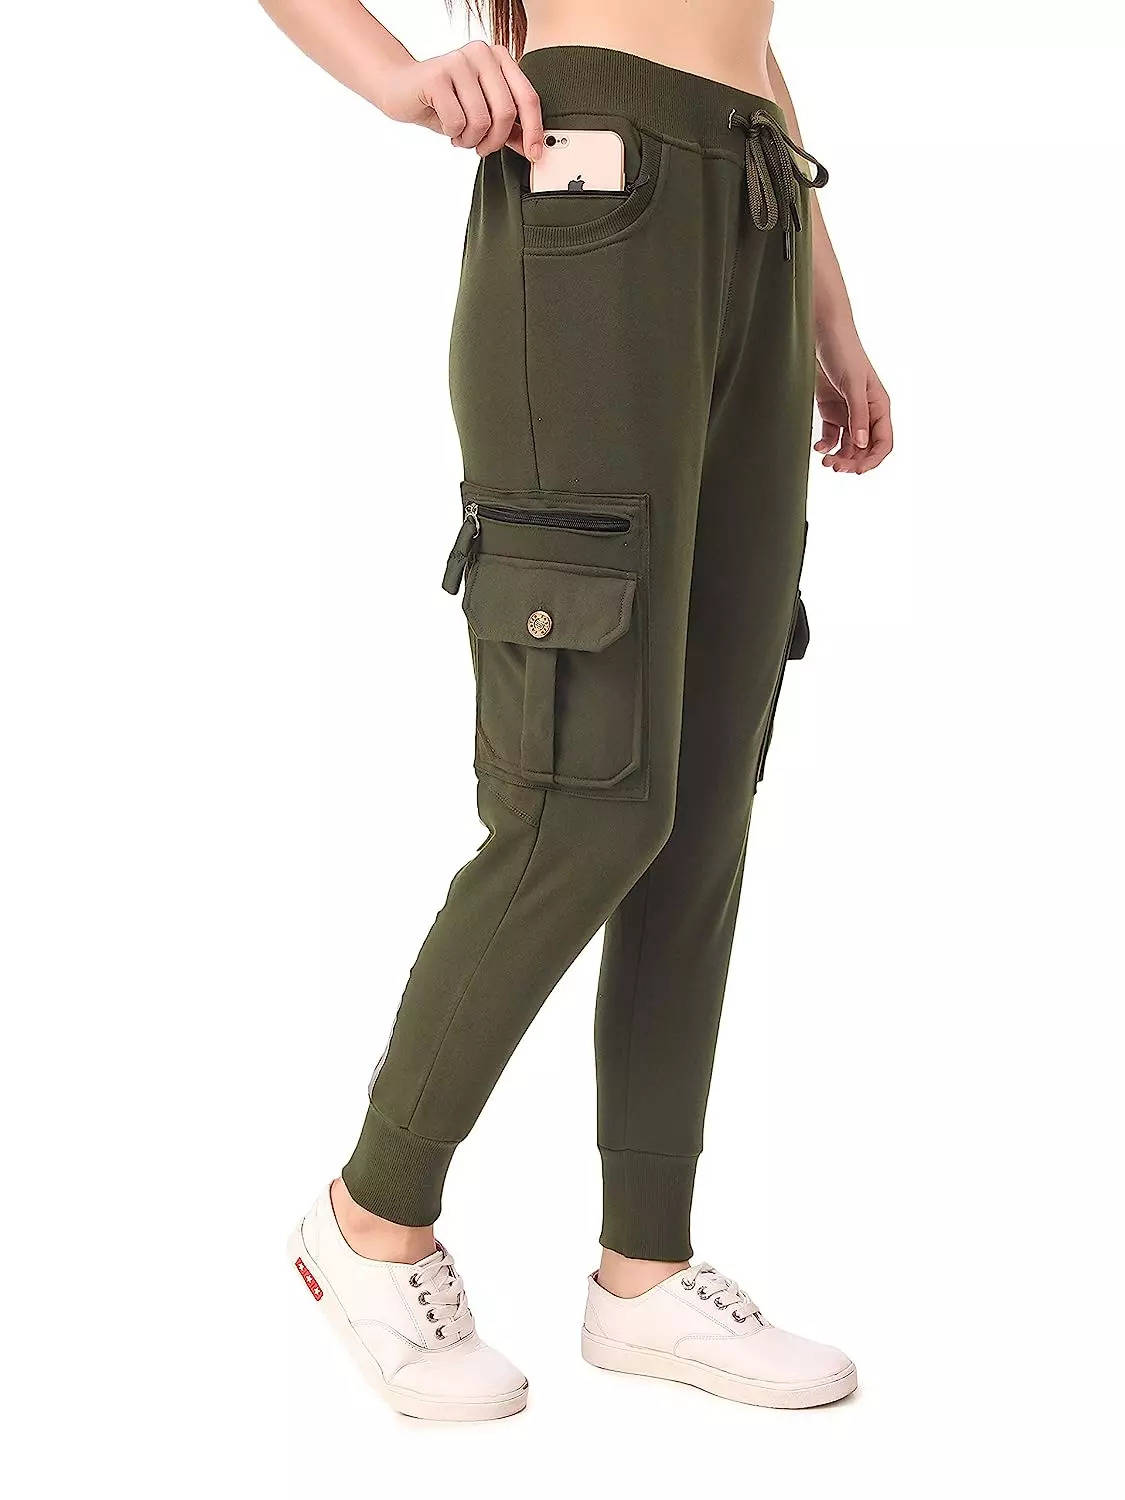 Cargo Pants for Women: 6 Best Cargo Pants for Women in India Starting ...